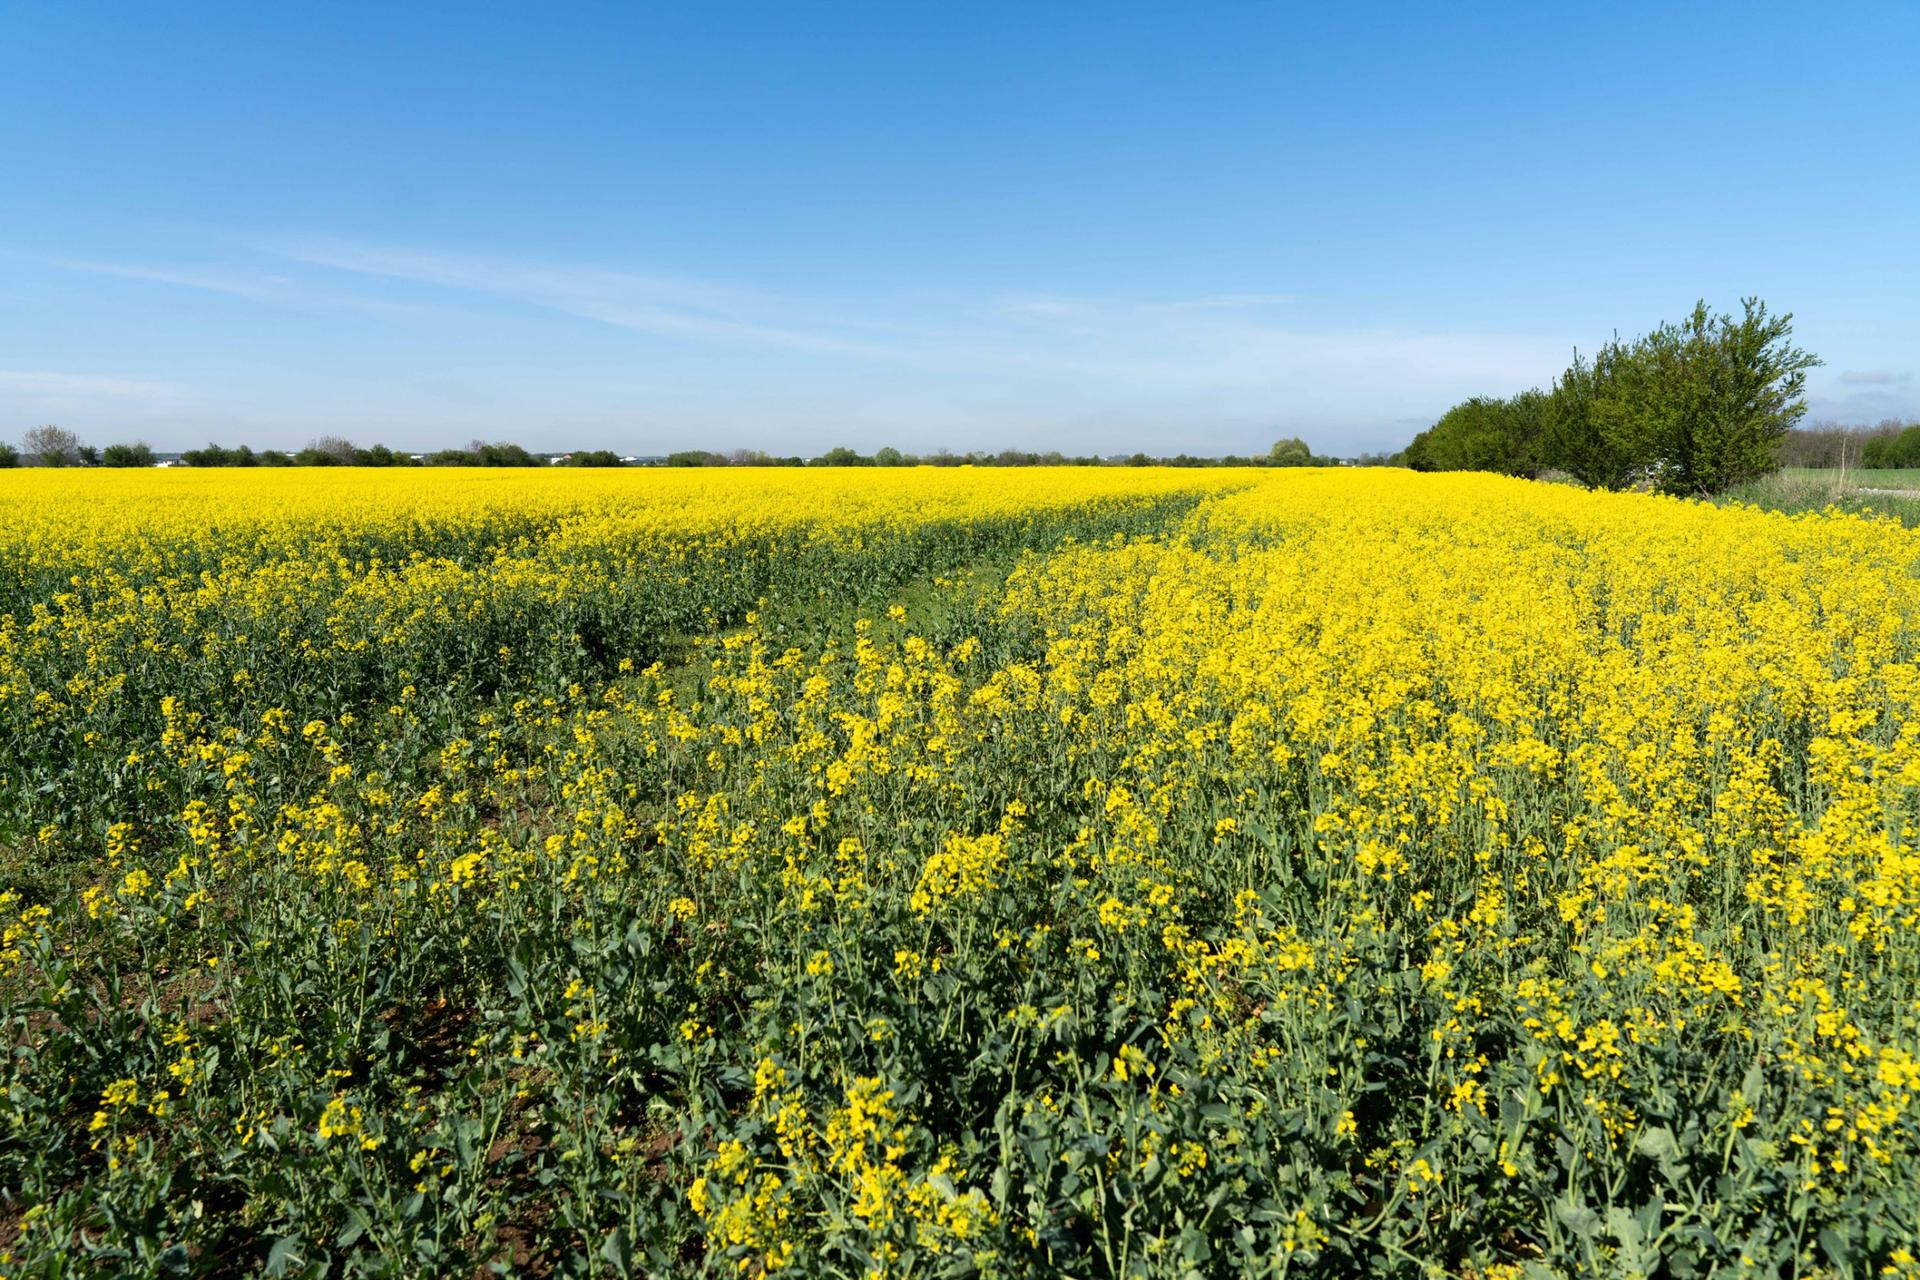 Last year, the oil factories that usually buy up rapeseed and sunflower said their stocks were already piled high.